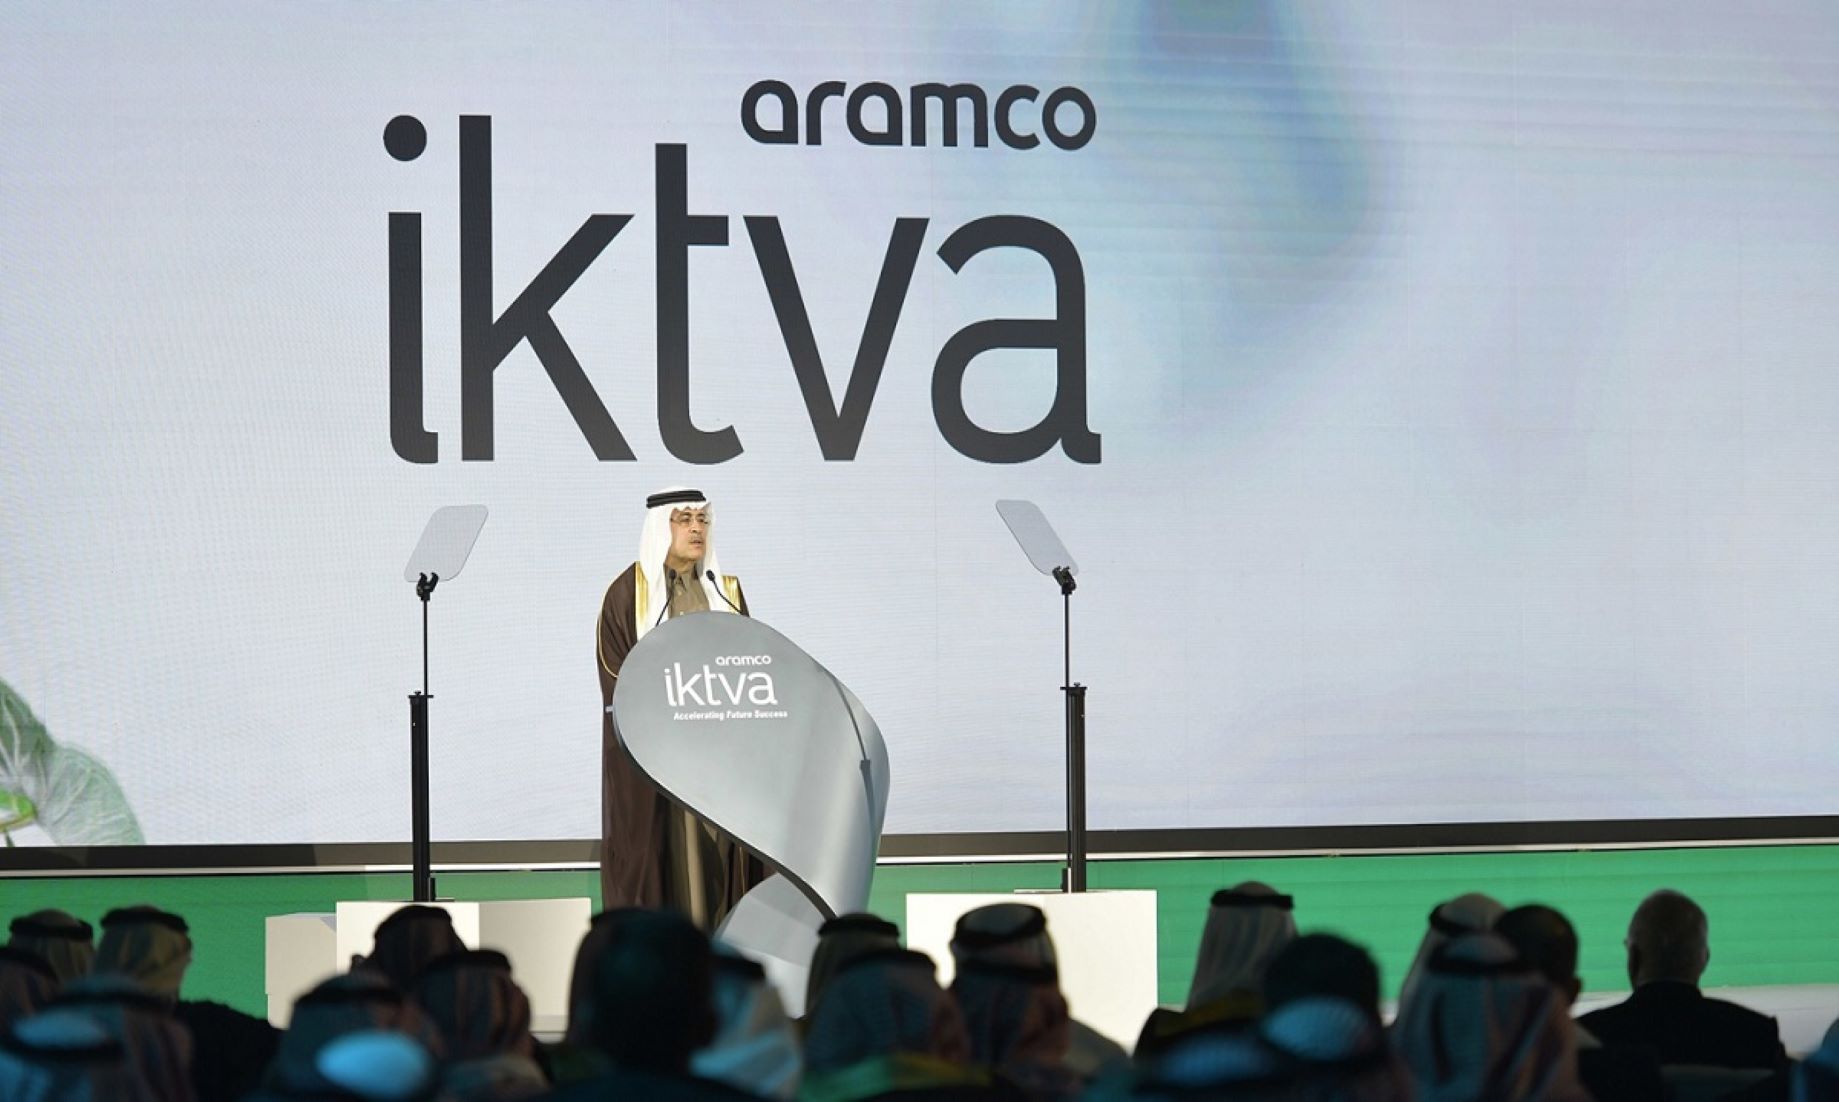 Aramco Signed 100 Deals To Improve Saudi Industrial Ecosystem